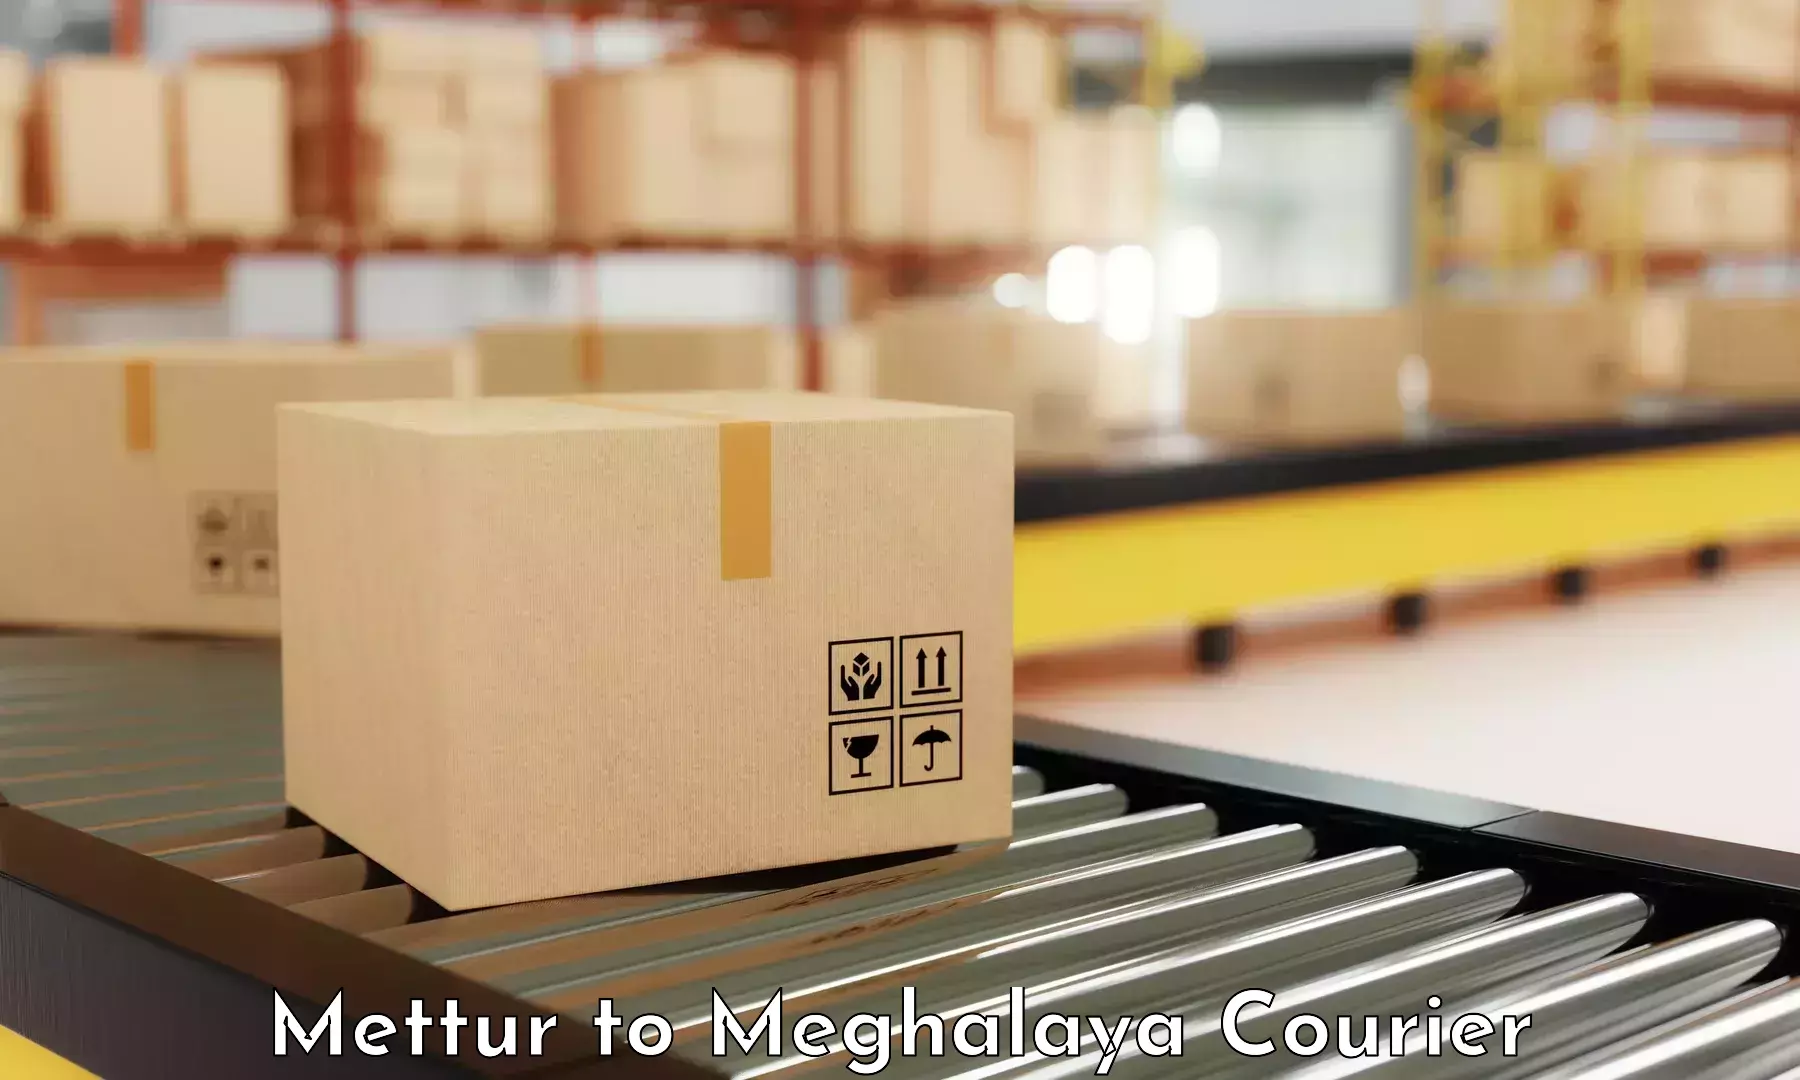 Business delivery service Mettur to Nongstoin